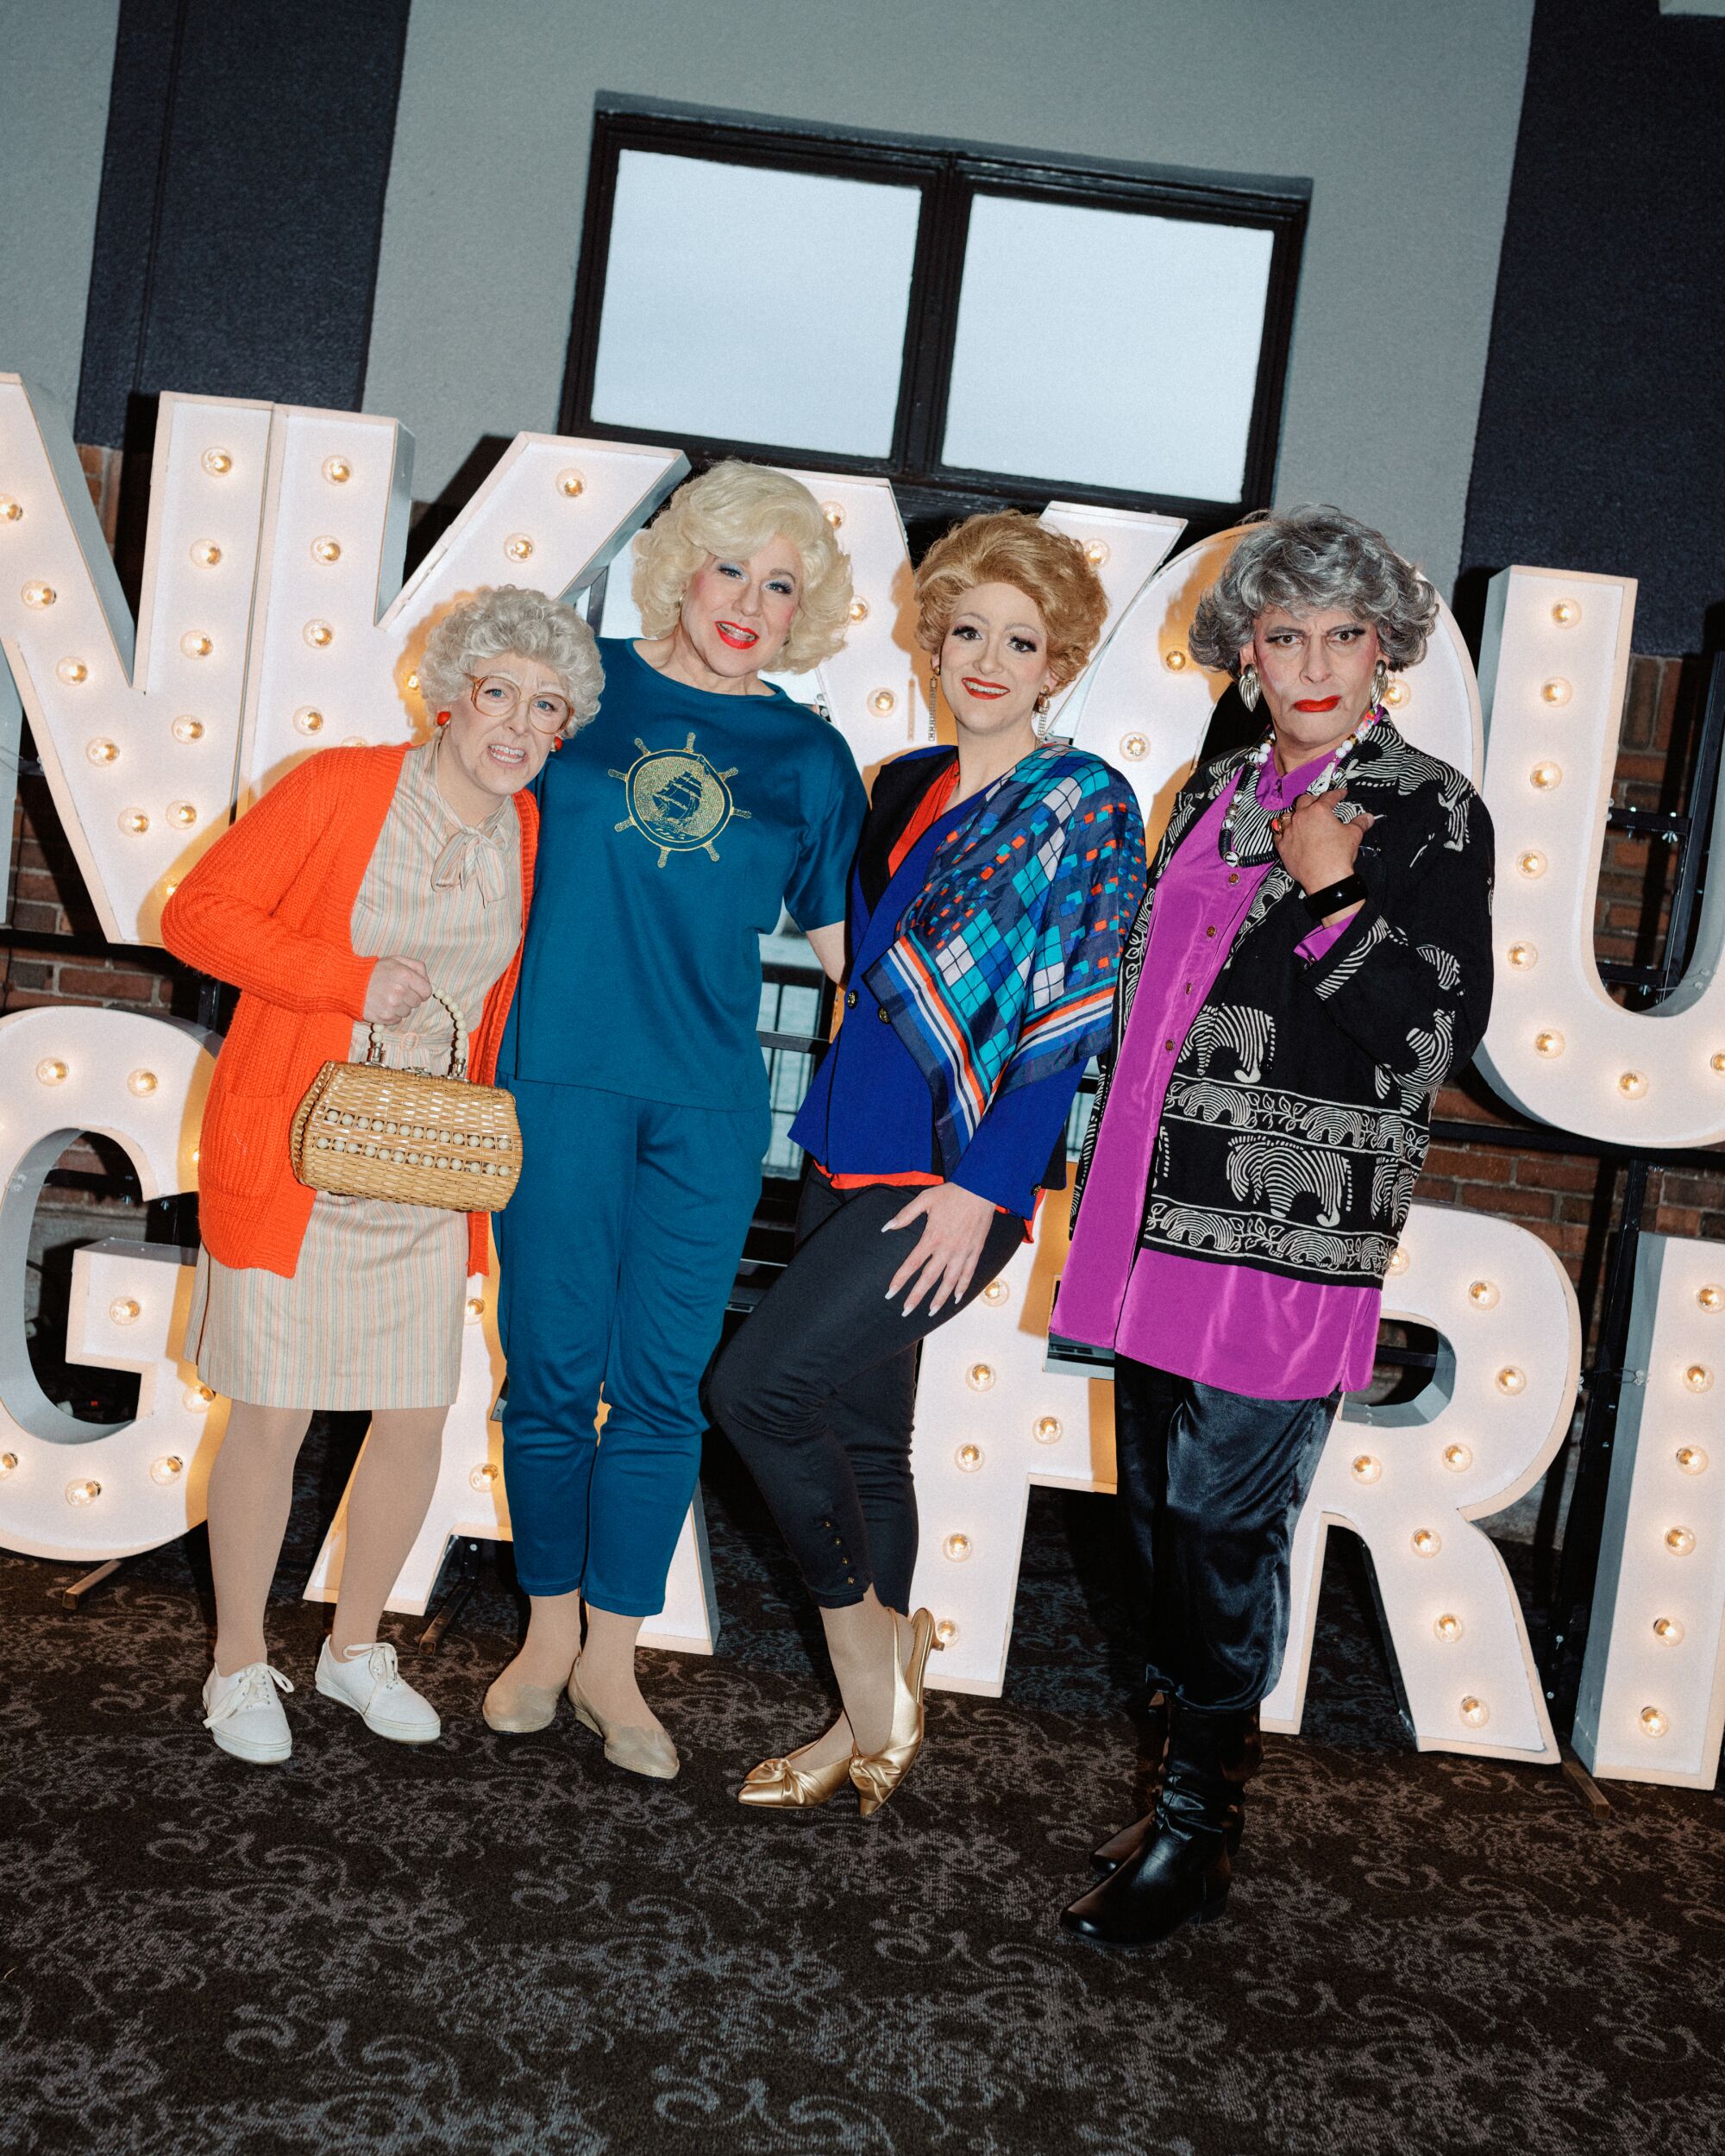 Four people in drag dressed as "Golden Girls" characters.